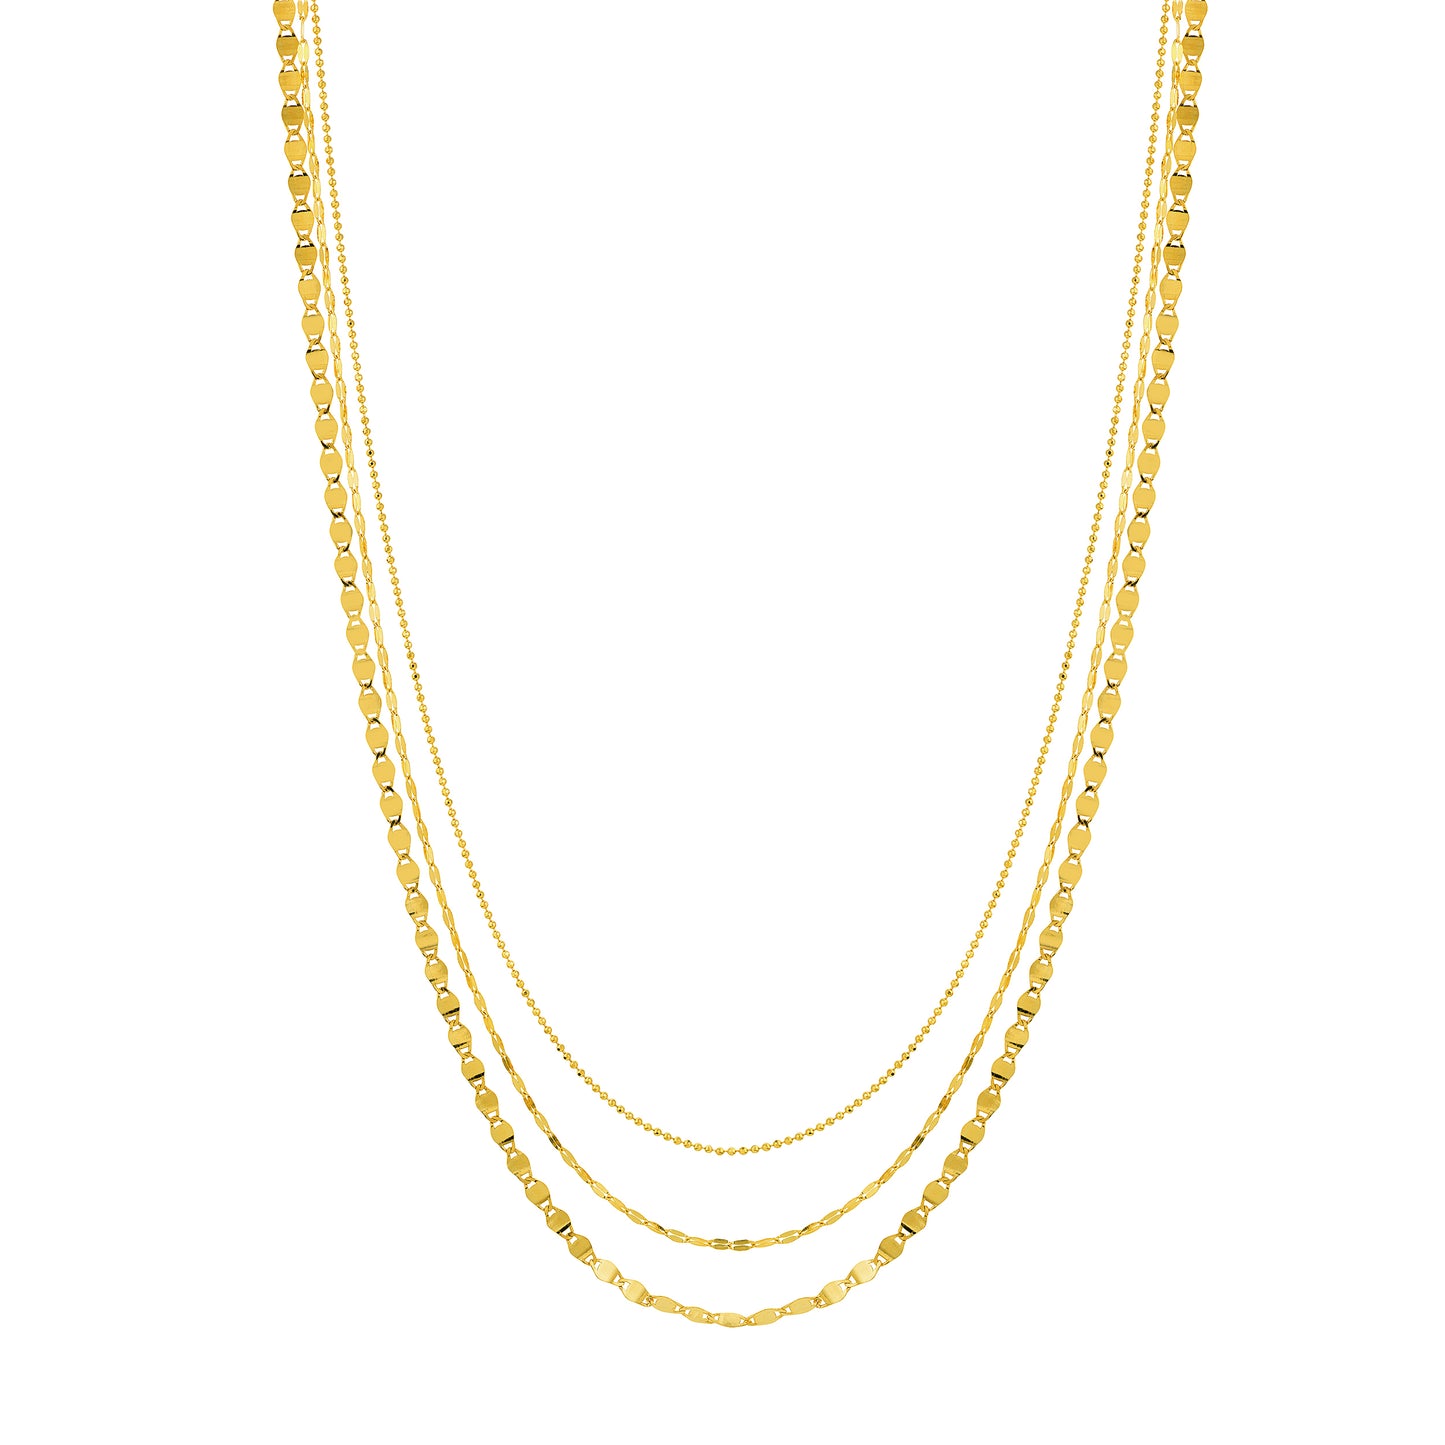 Gold Triple Strand Necklace